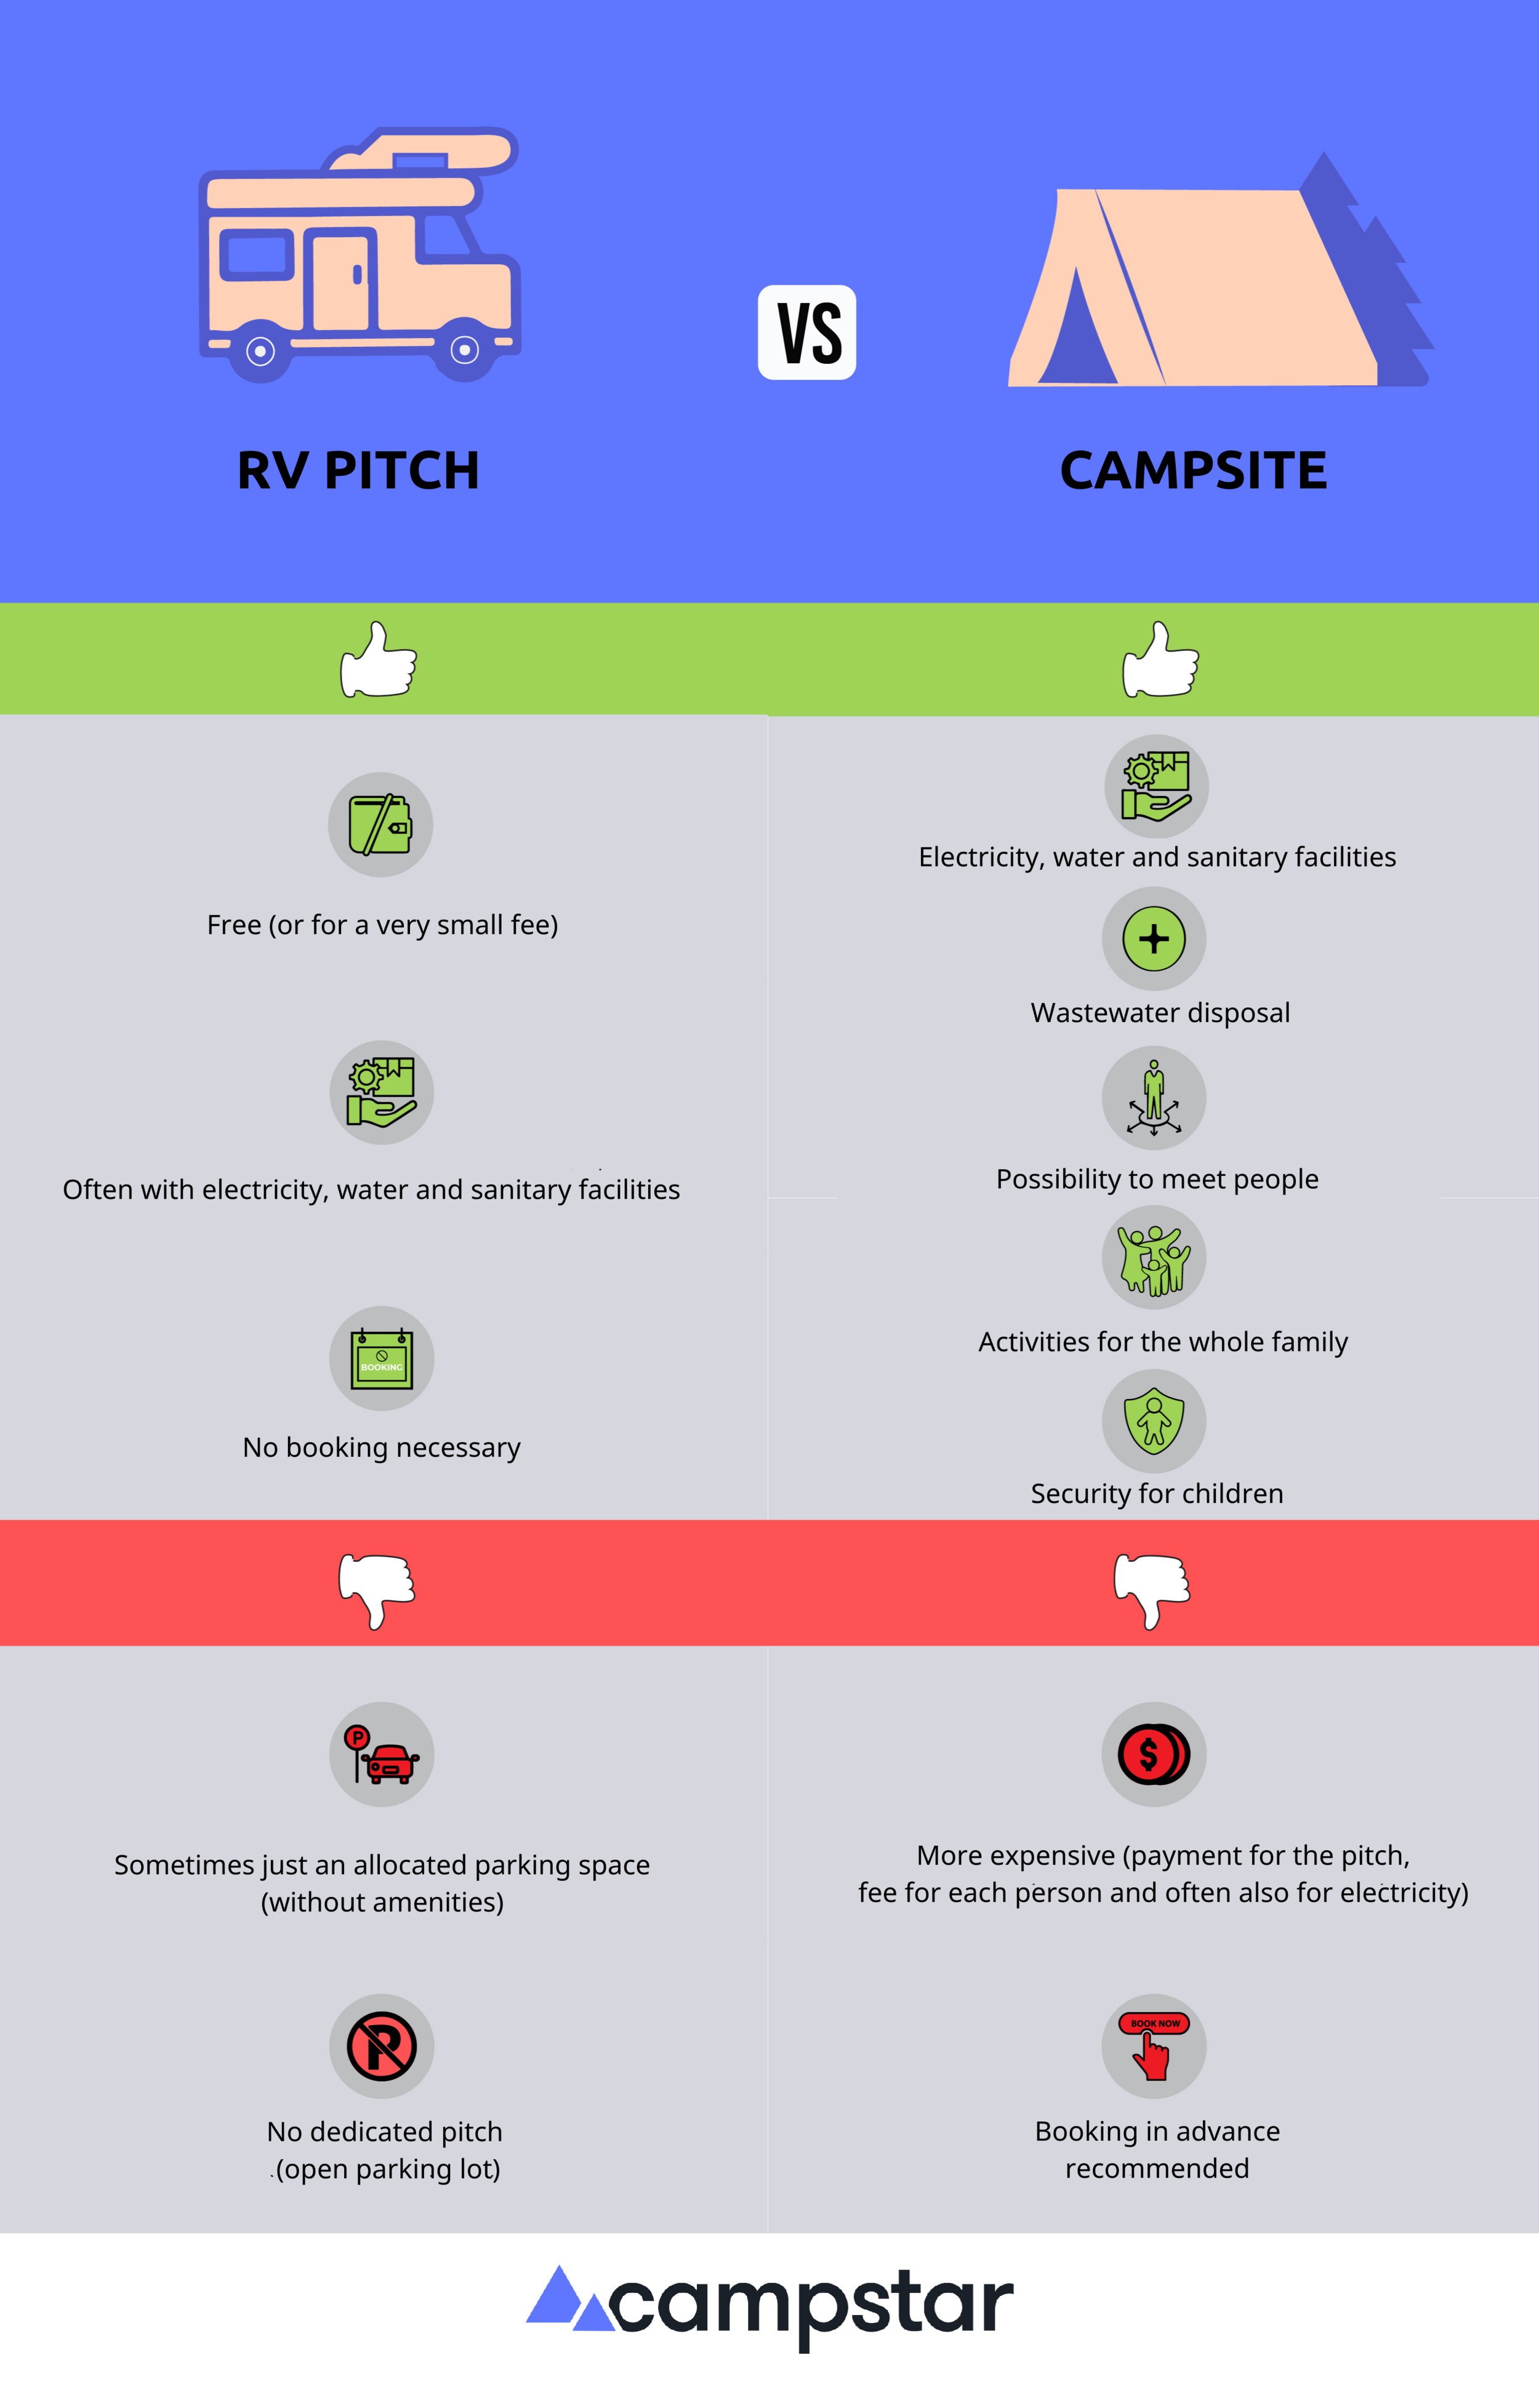 RV pitch VS Campsite with pros and cons